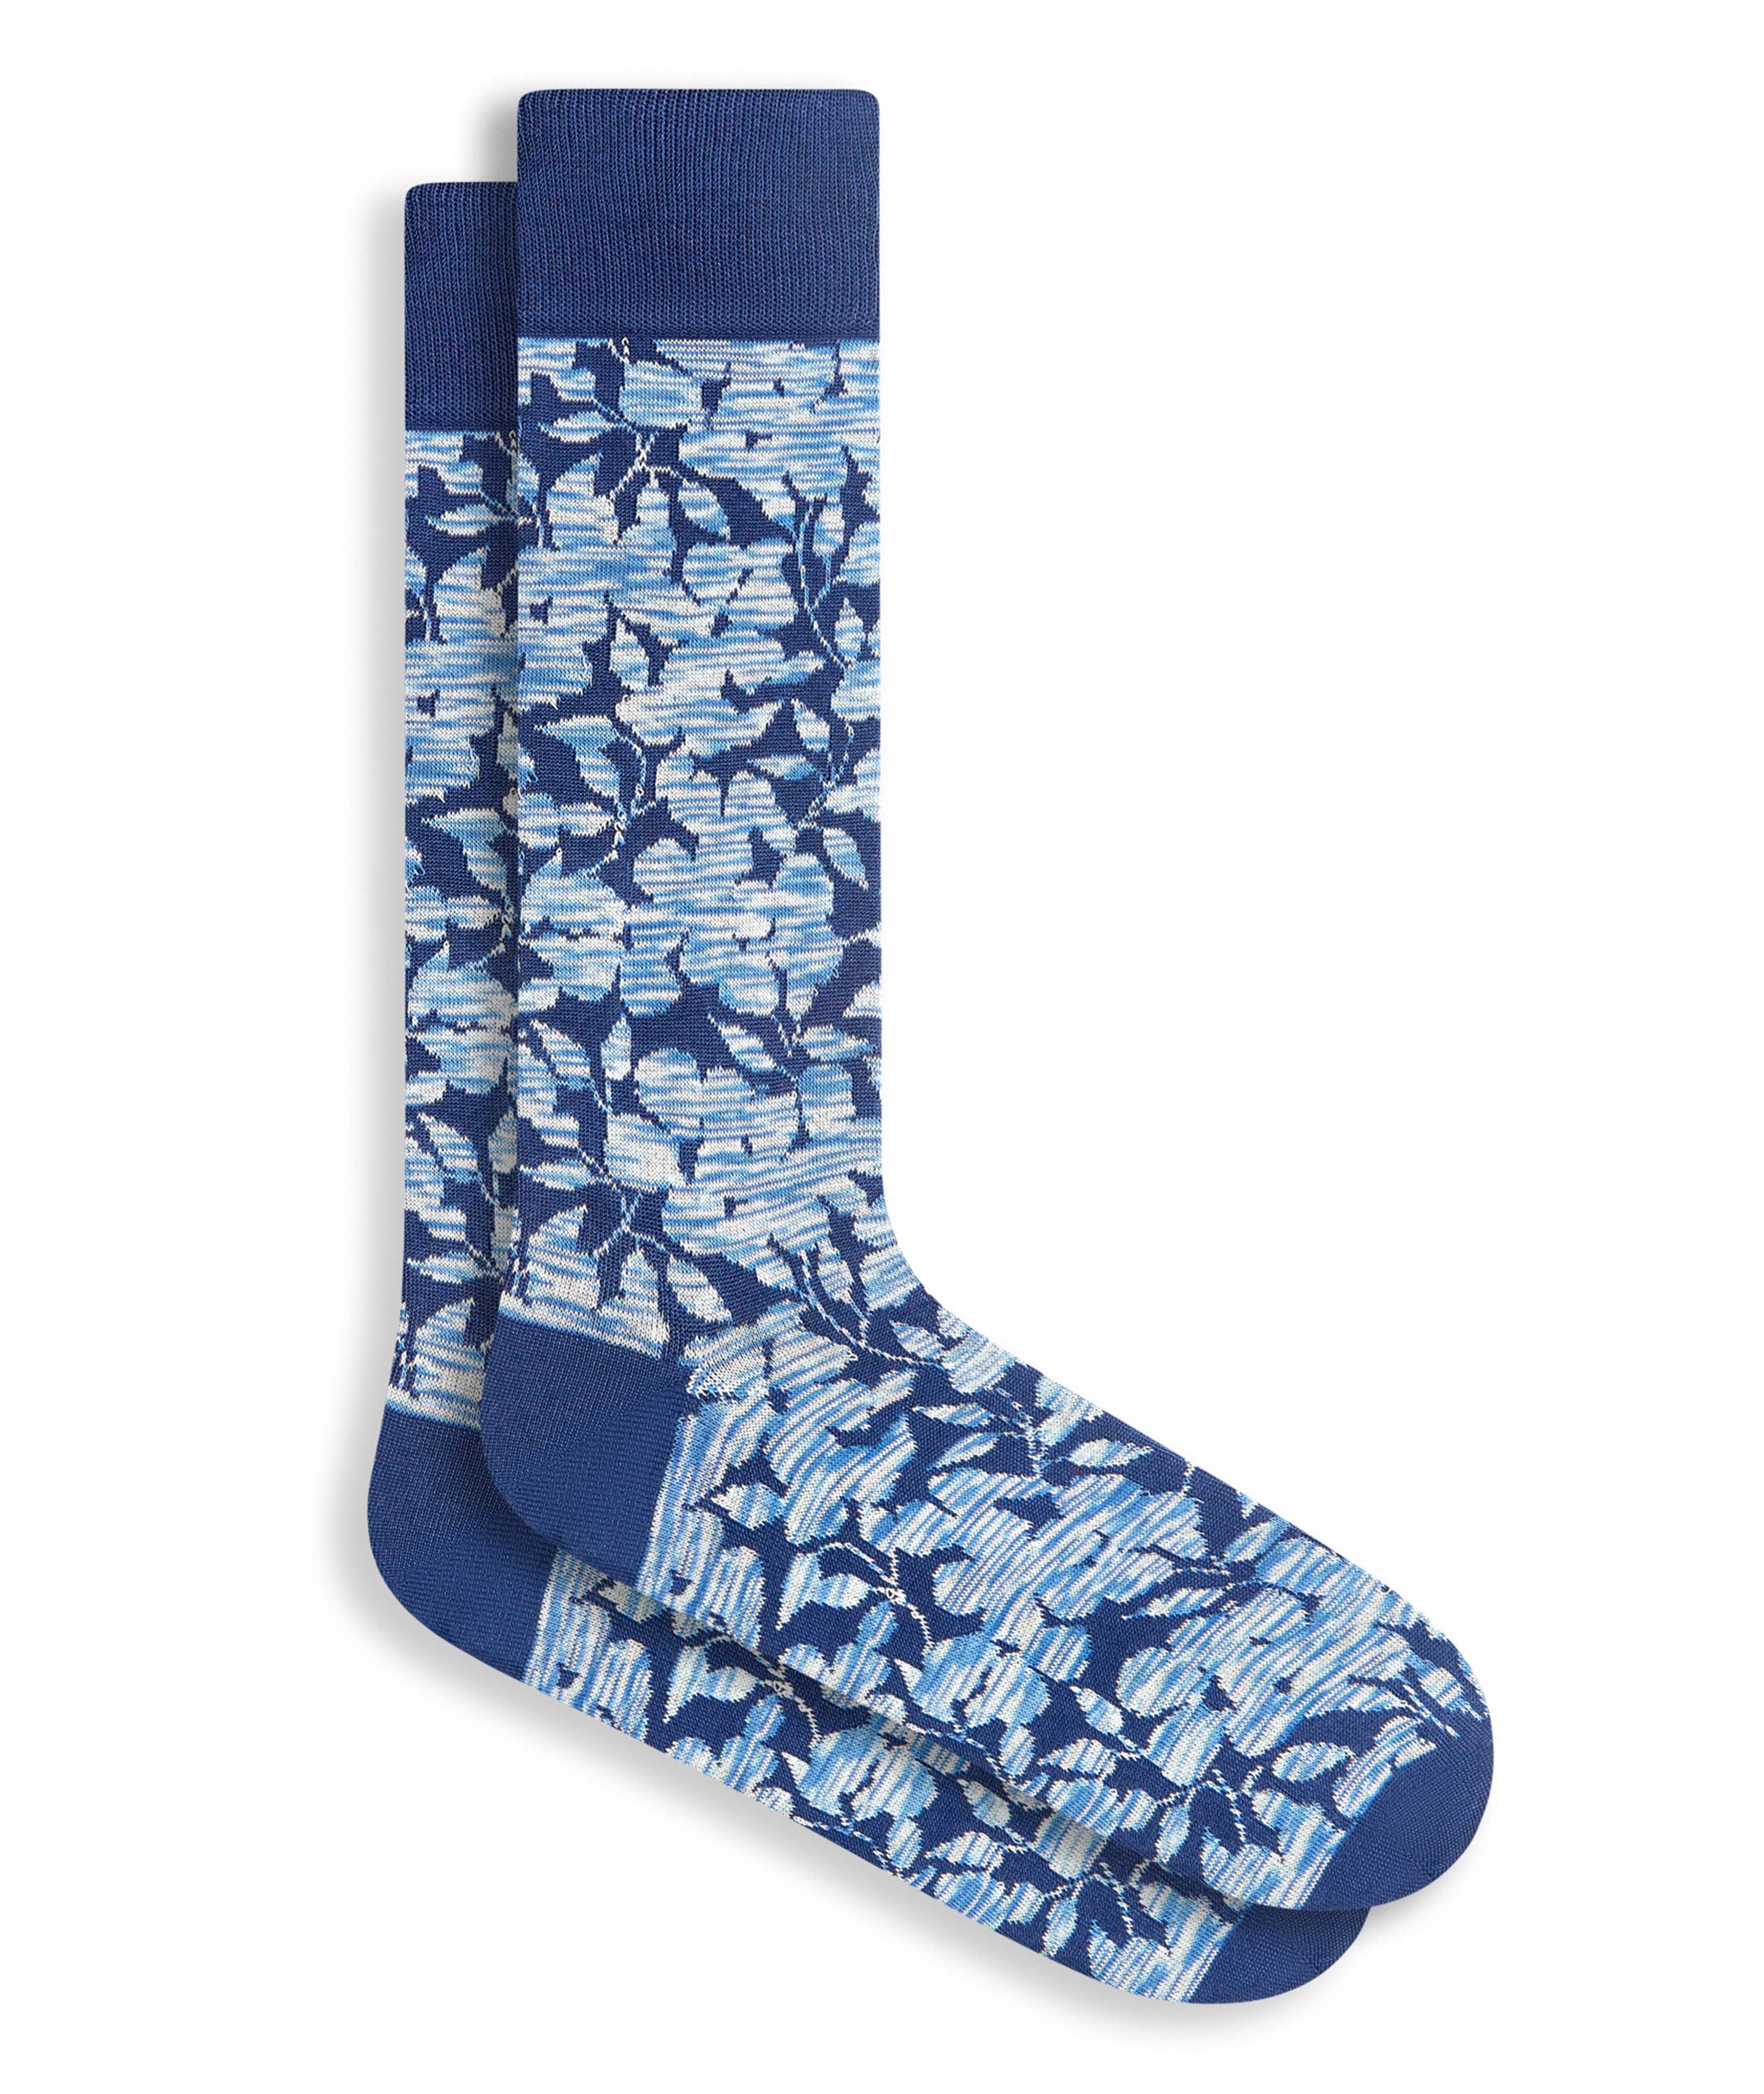 Floral Marbled Printed Stretch-Cotton Socks image 0